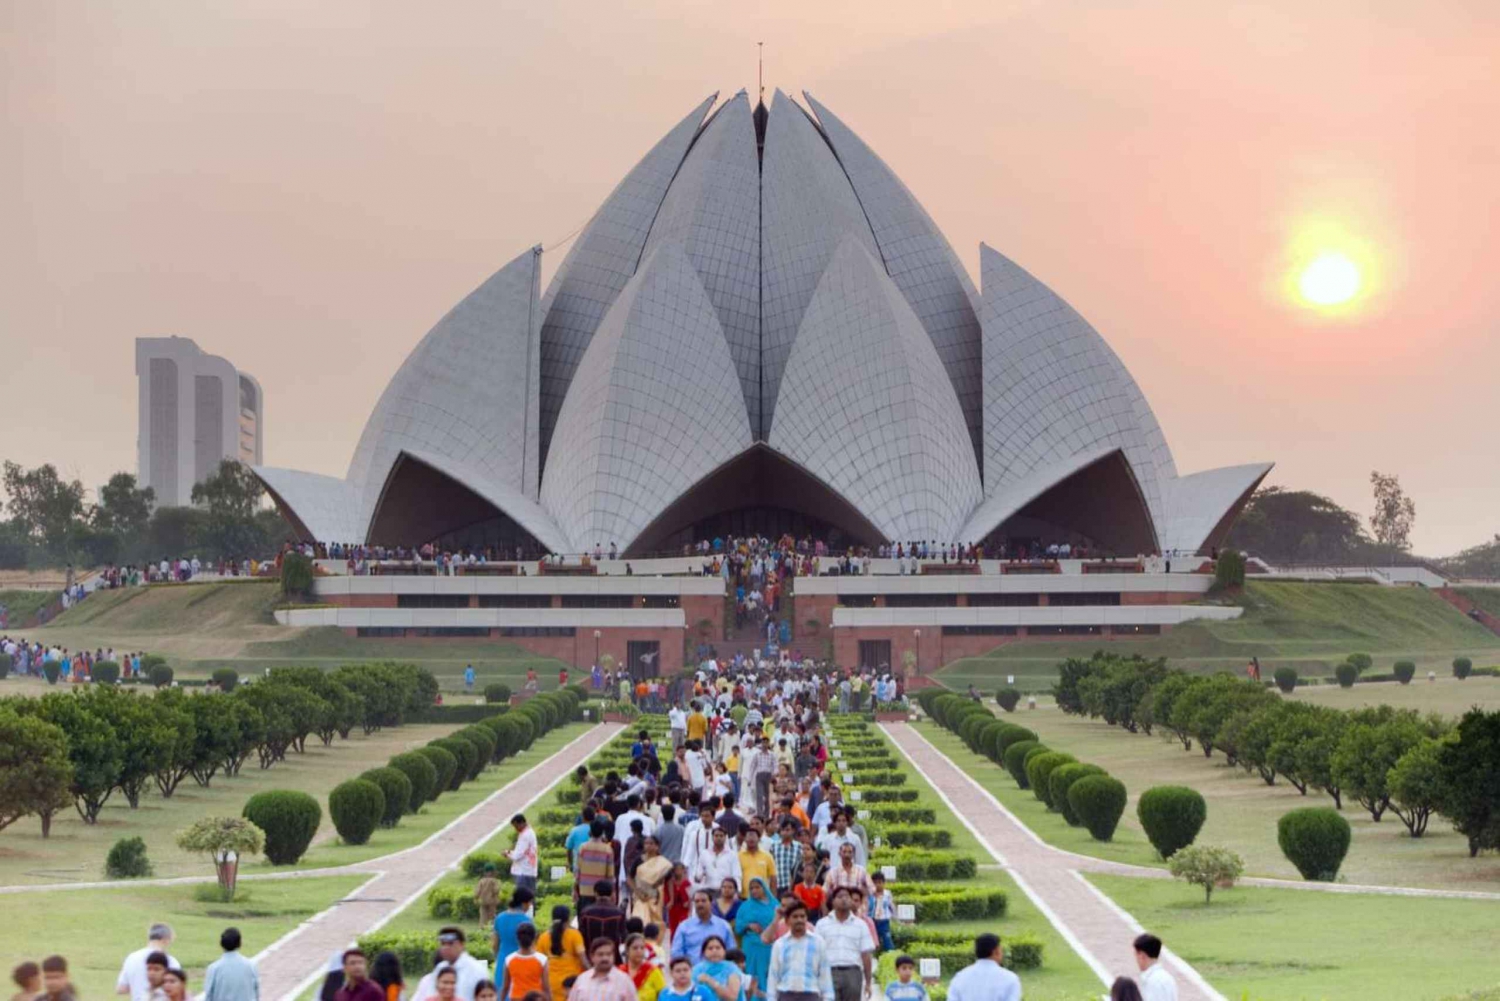 New Delhi: Private Golden Triangle 4-Day Tour with Lodging